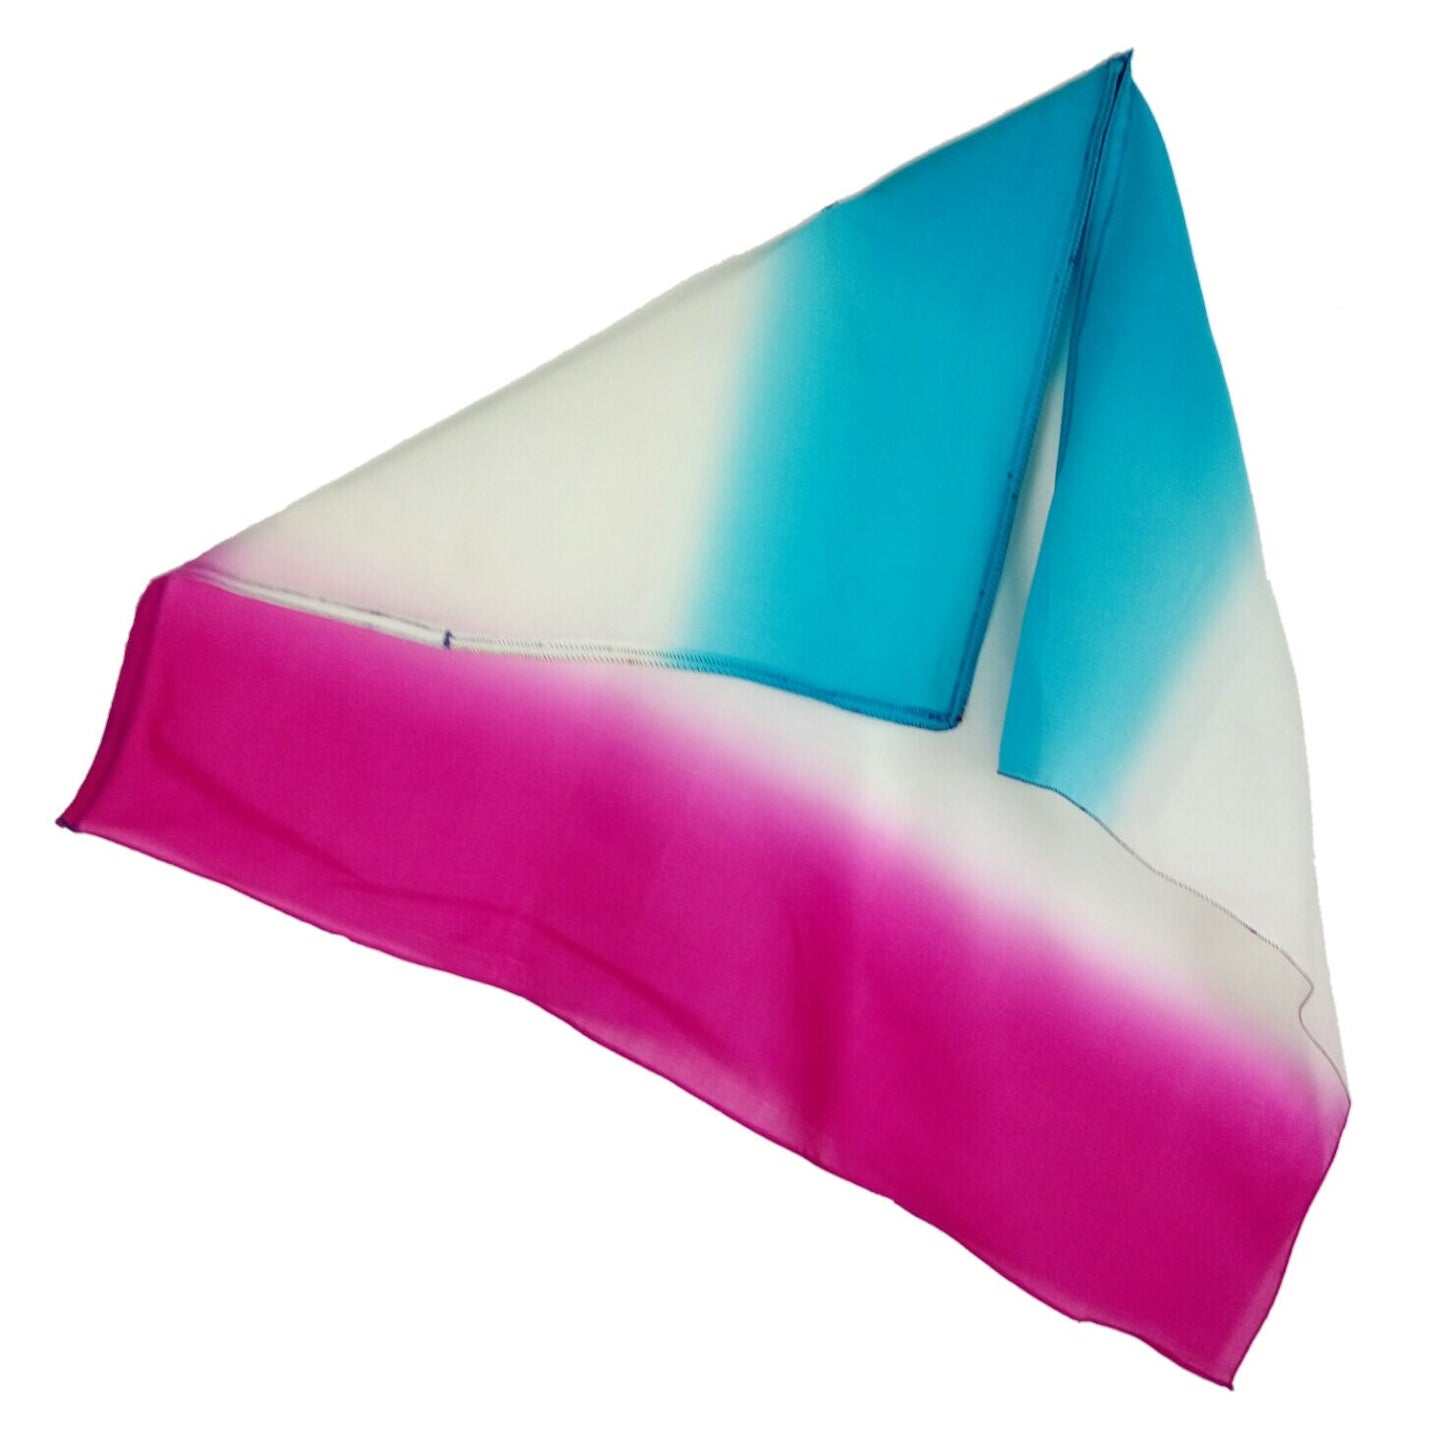 Multi-Color Swing Flag M-size - Buy 1 get 1 Free